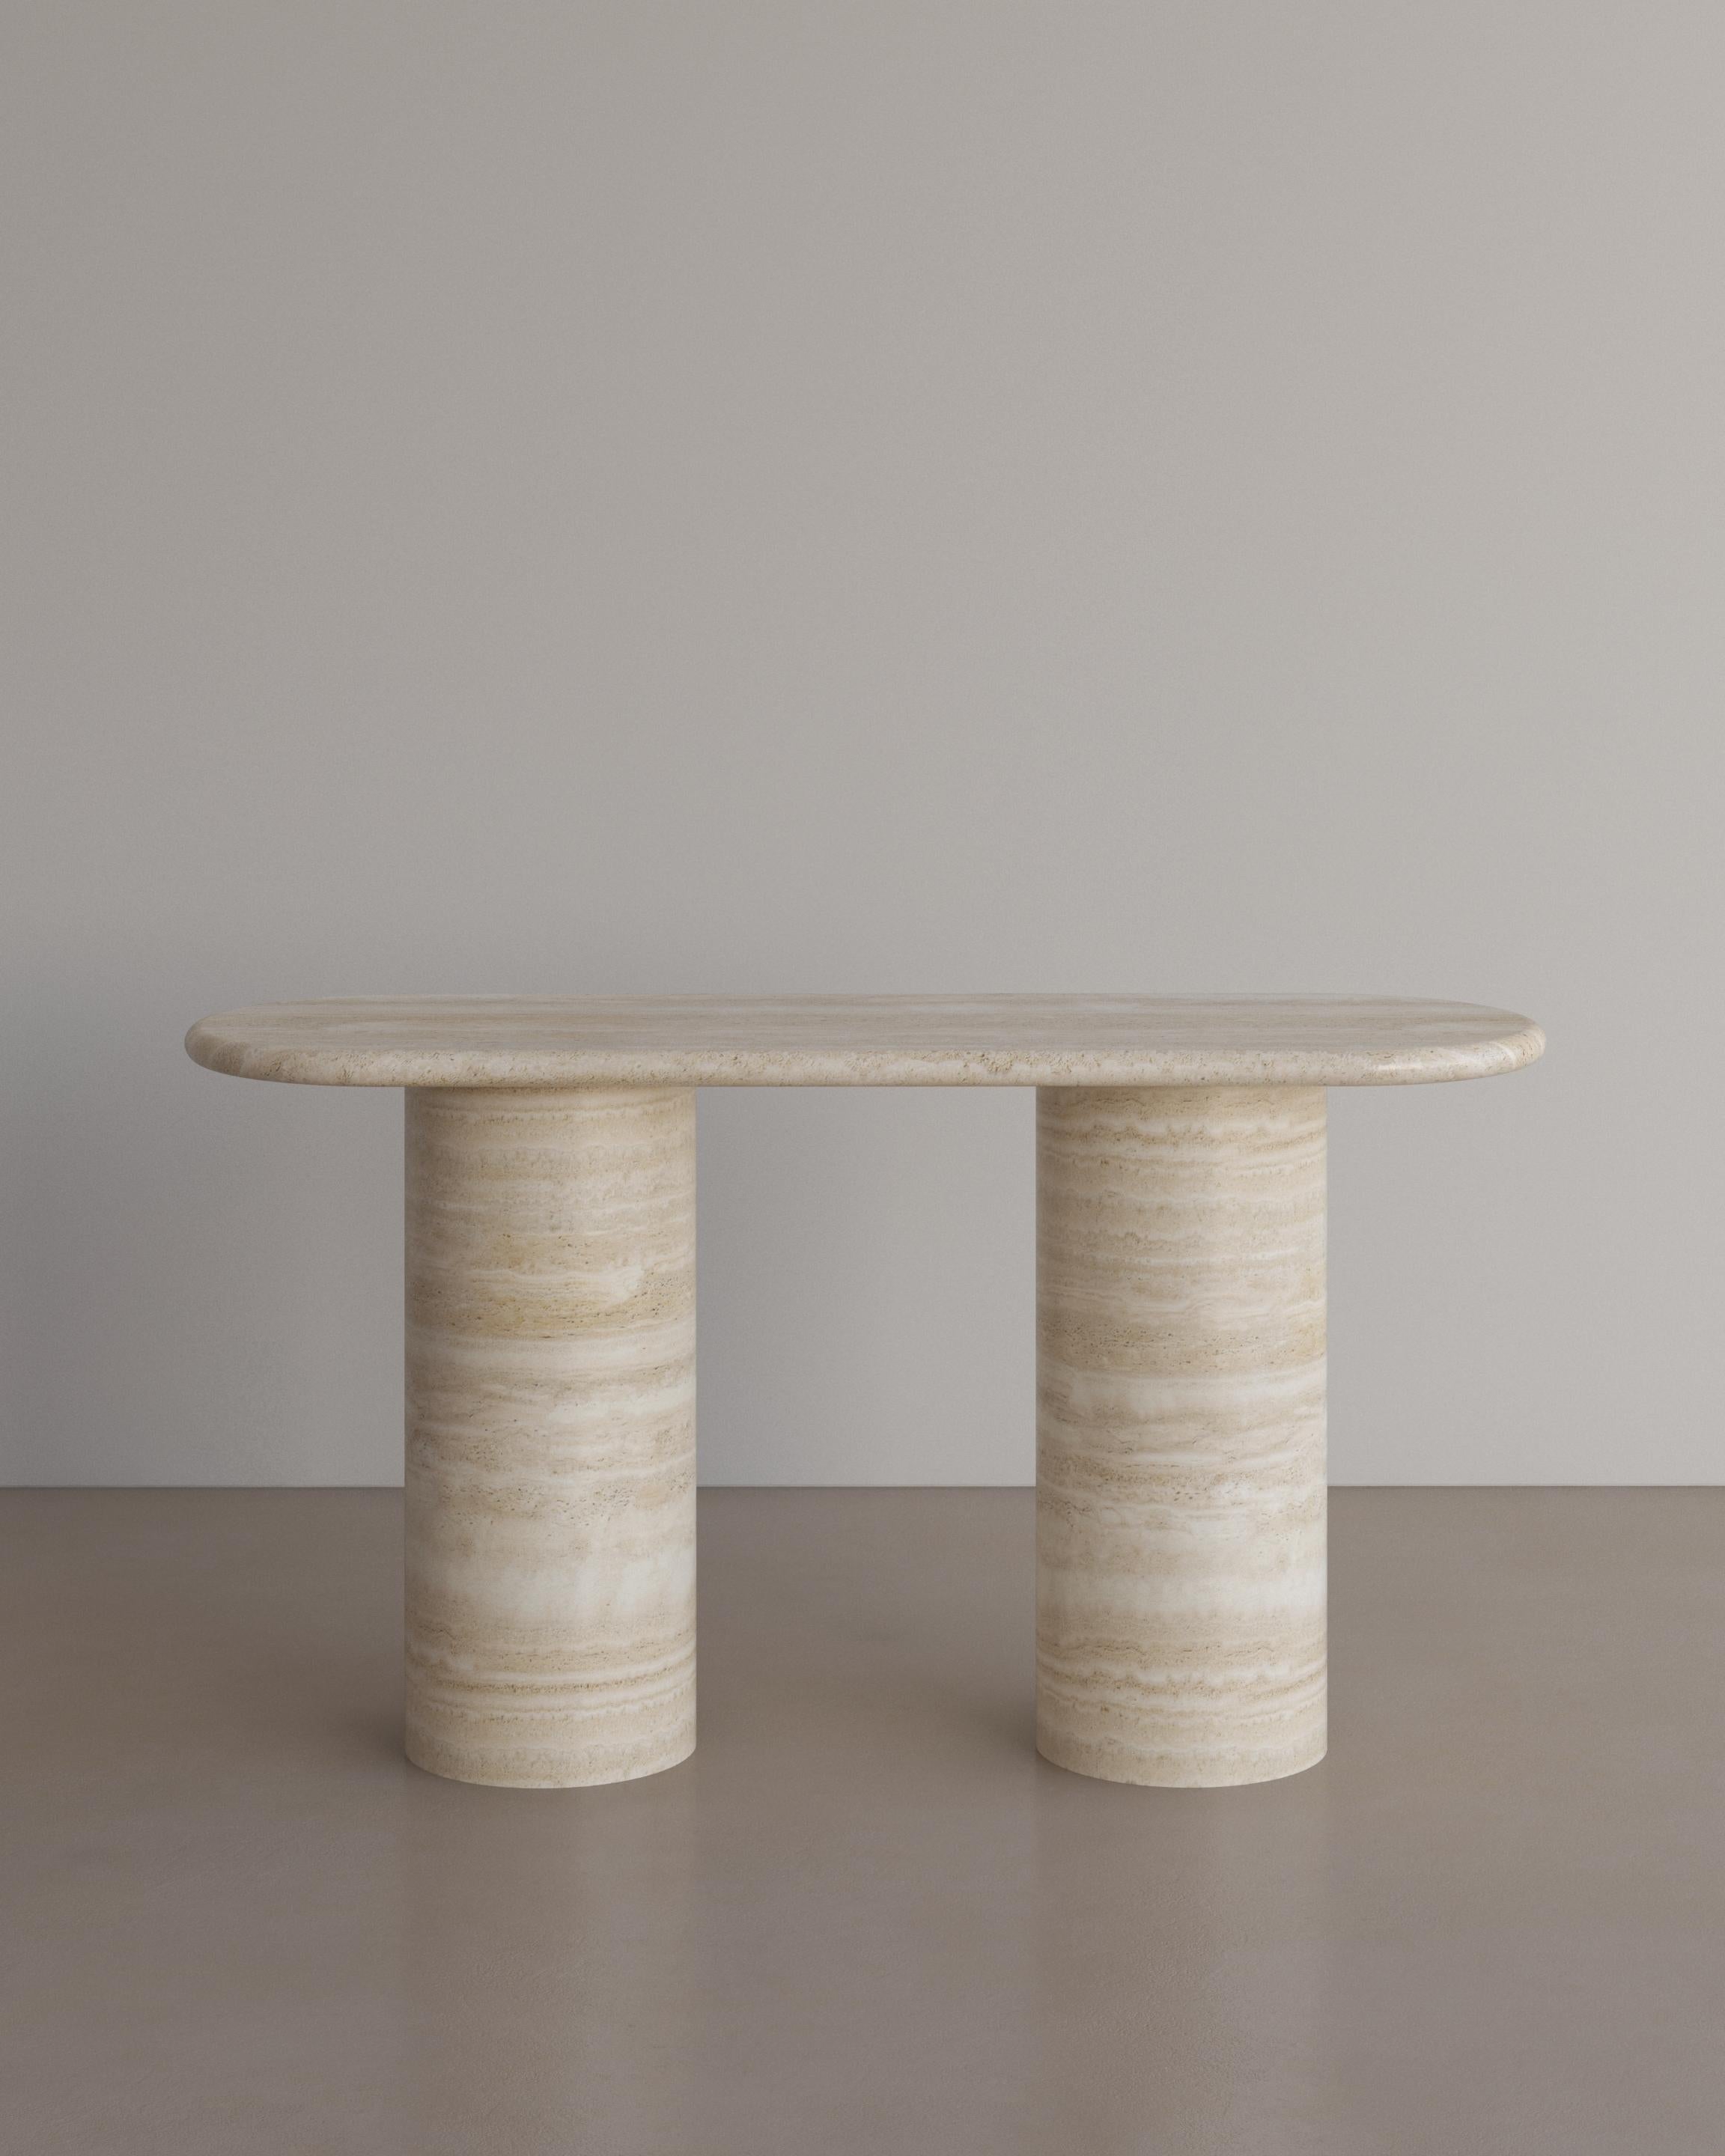 The Voyage Console table in Bianco Travertine by The Essentialist defines life’s simple pleasures in its essential form. Soft planes resting on smooth pillars reflect nature’s aesthetic balance and perfect harmony.

Igniting a dance between